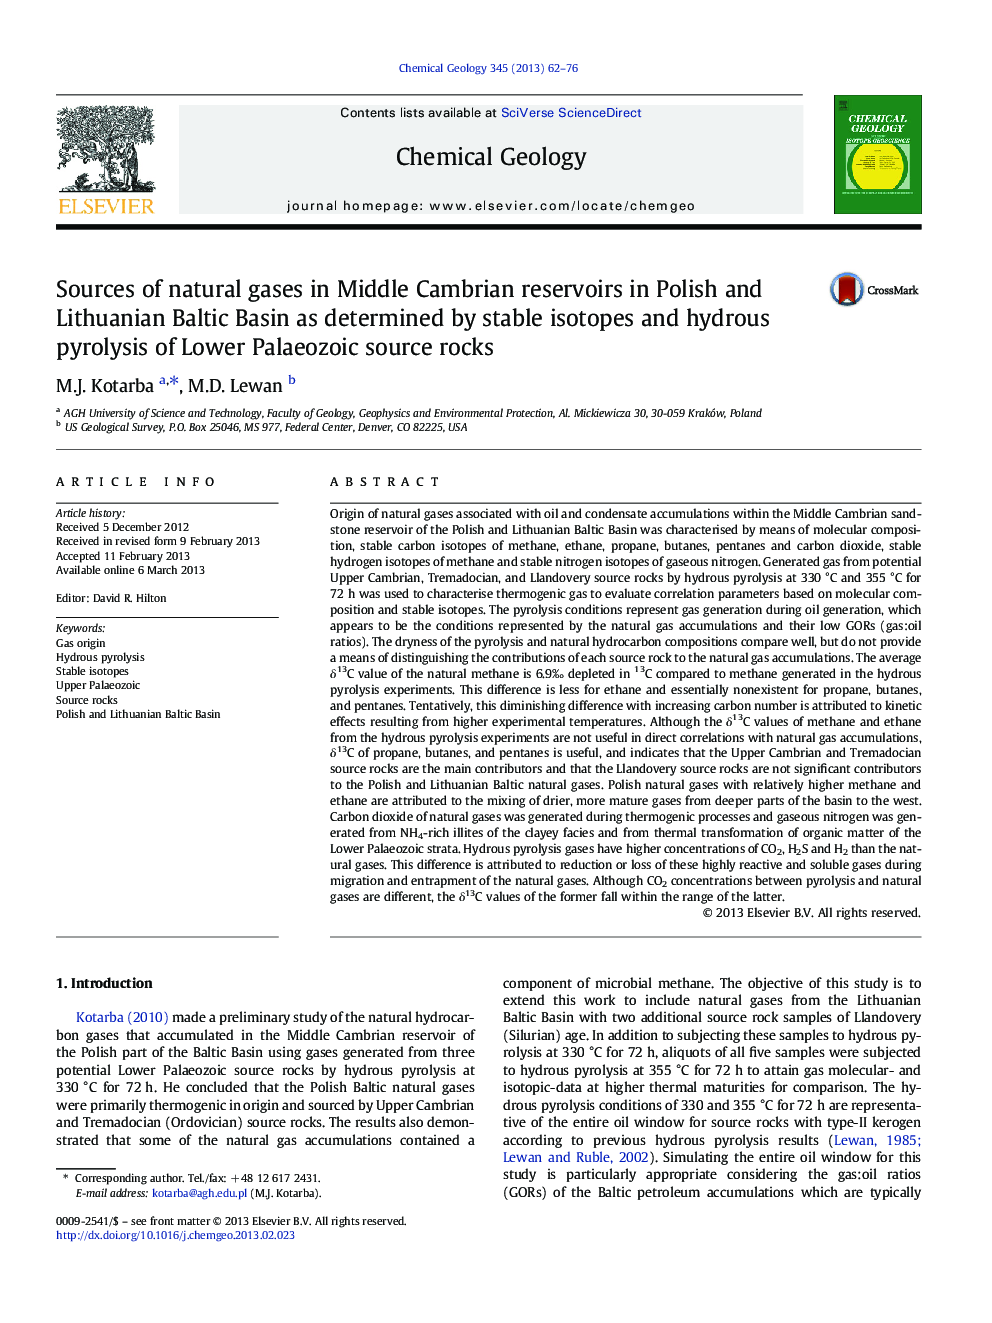 Sources of natural gases in Middle Cambrian reservoirs in Polish and Lithuanian Baltic Basin as determined by stable isotopes and hydrous pyrolysis of Lower Palaeozoic source rocks